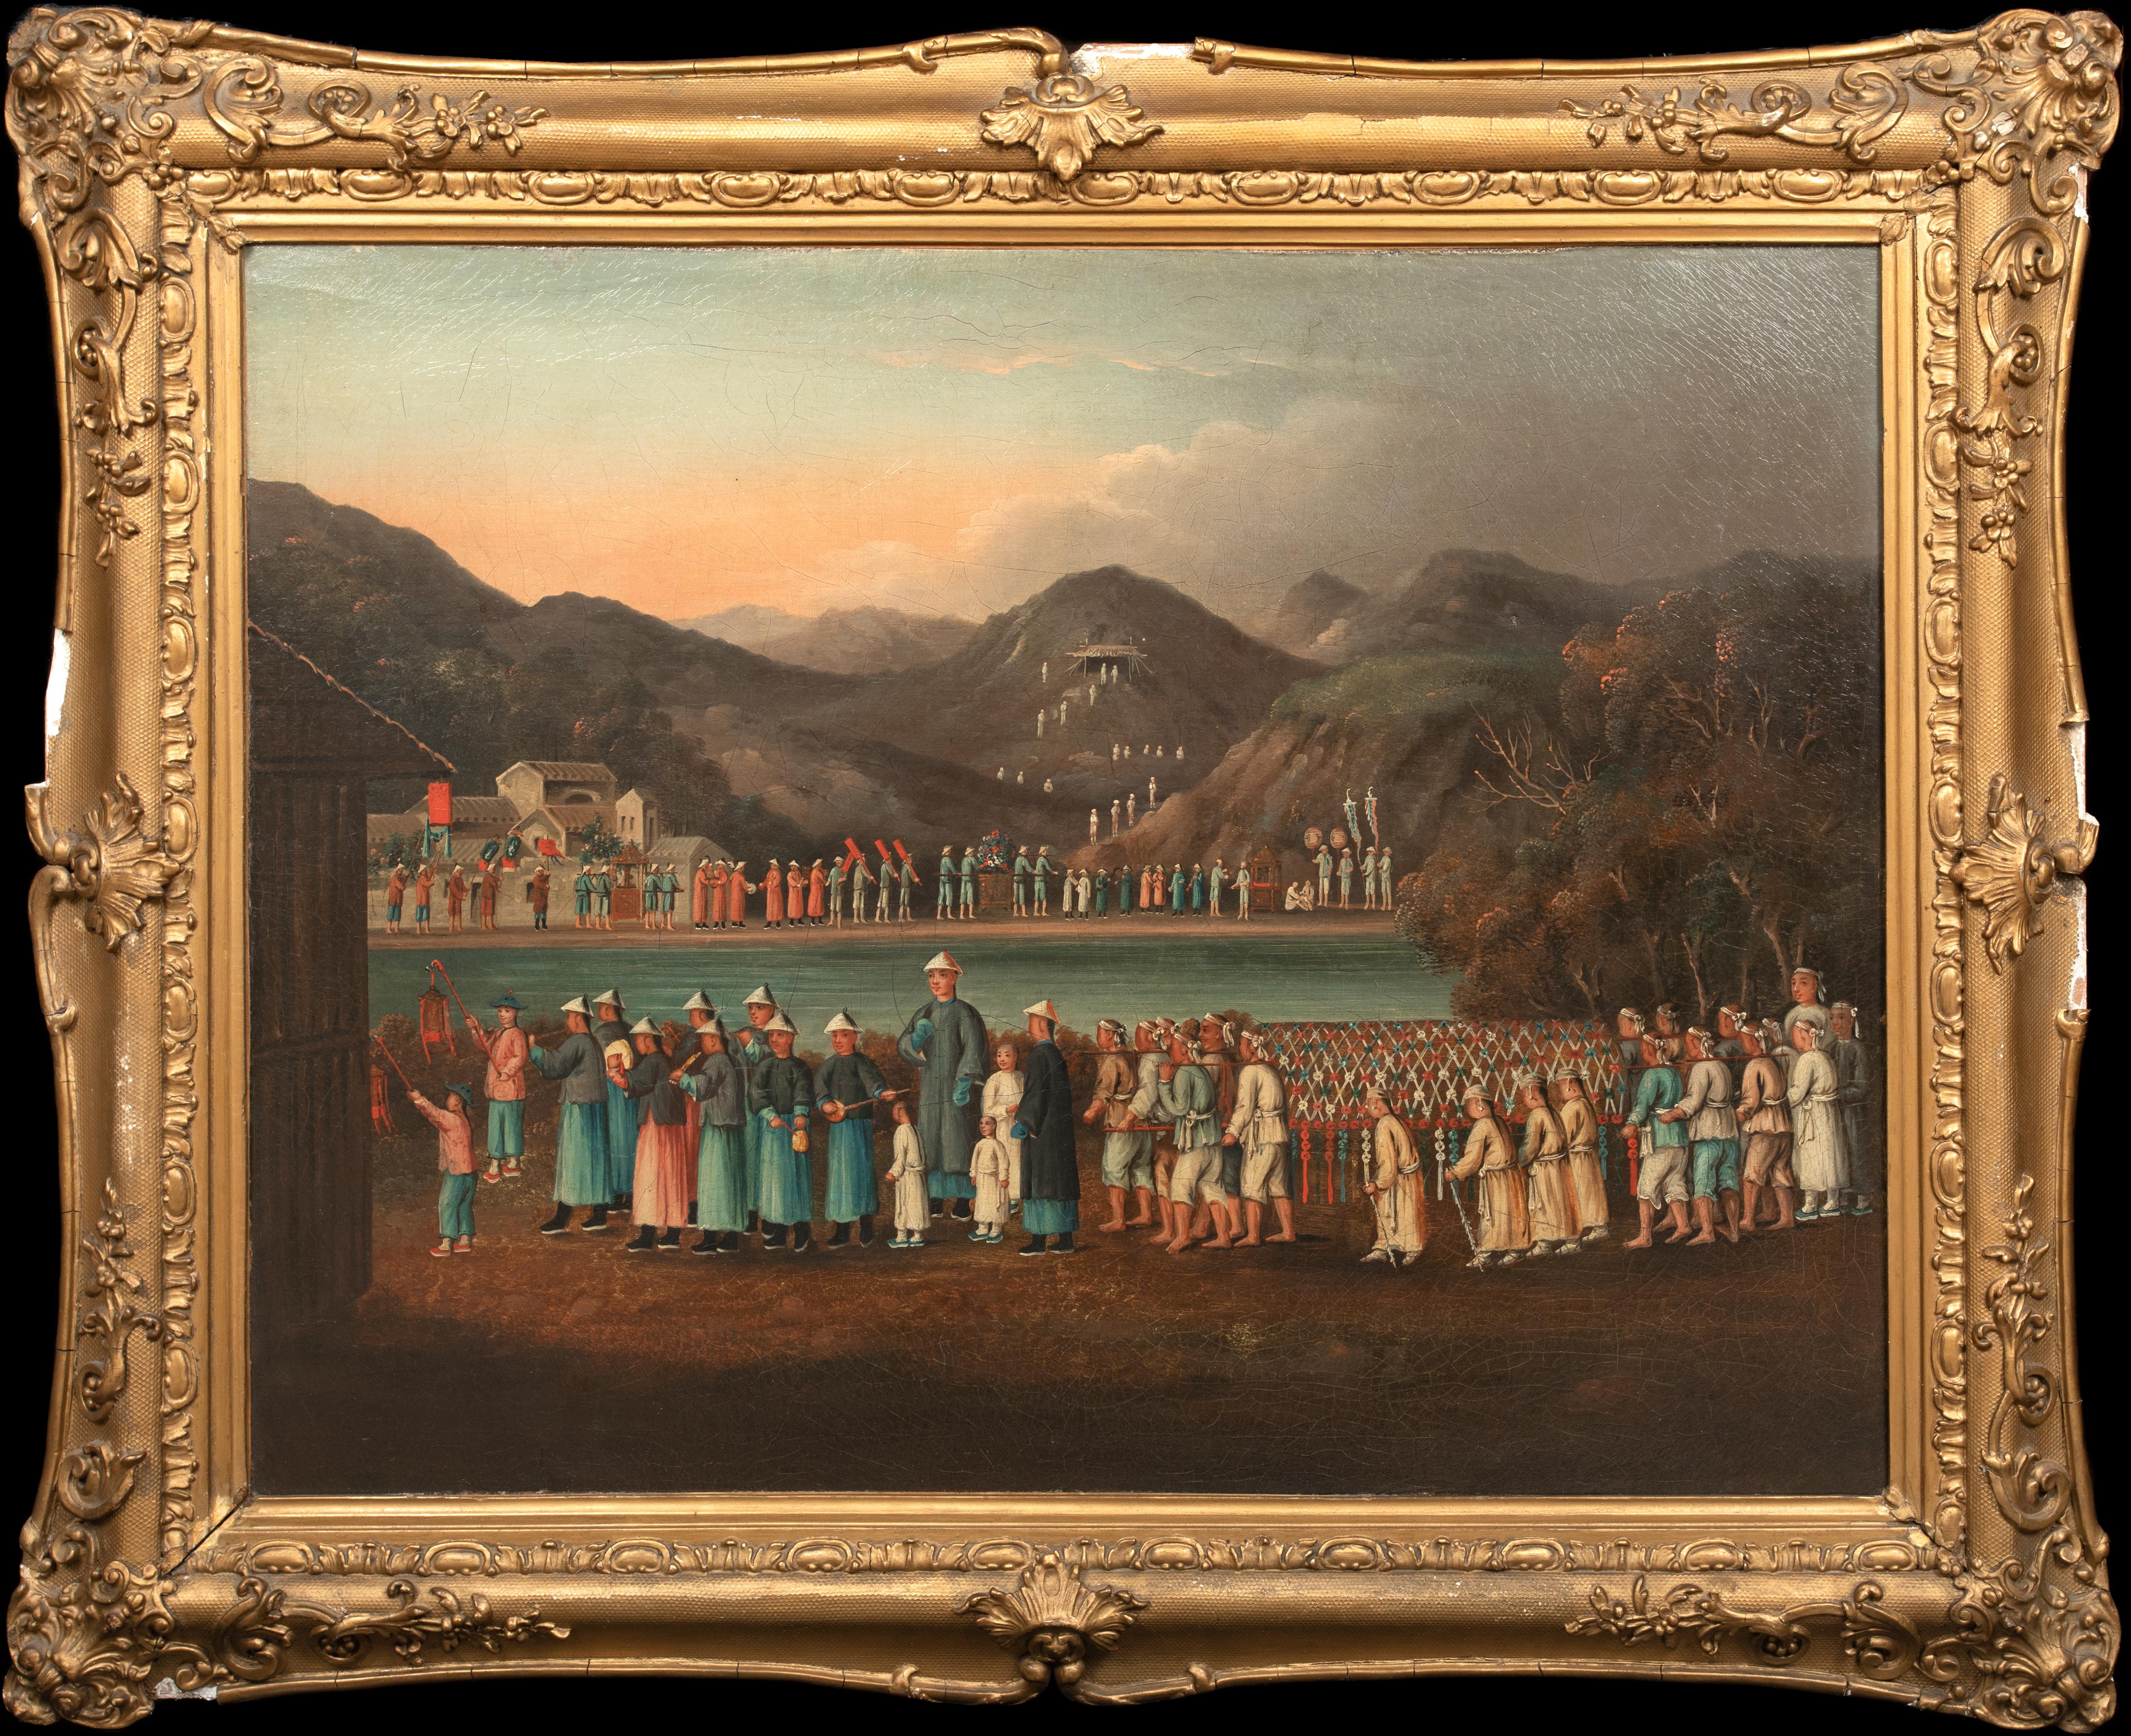 Unknown Landscape Painting – The Funeral Procession, um 1820   Chinesische Schule